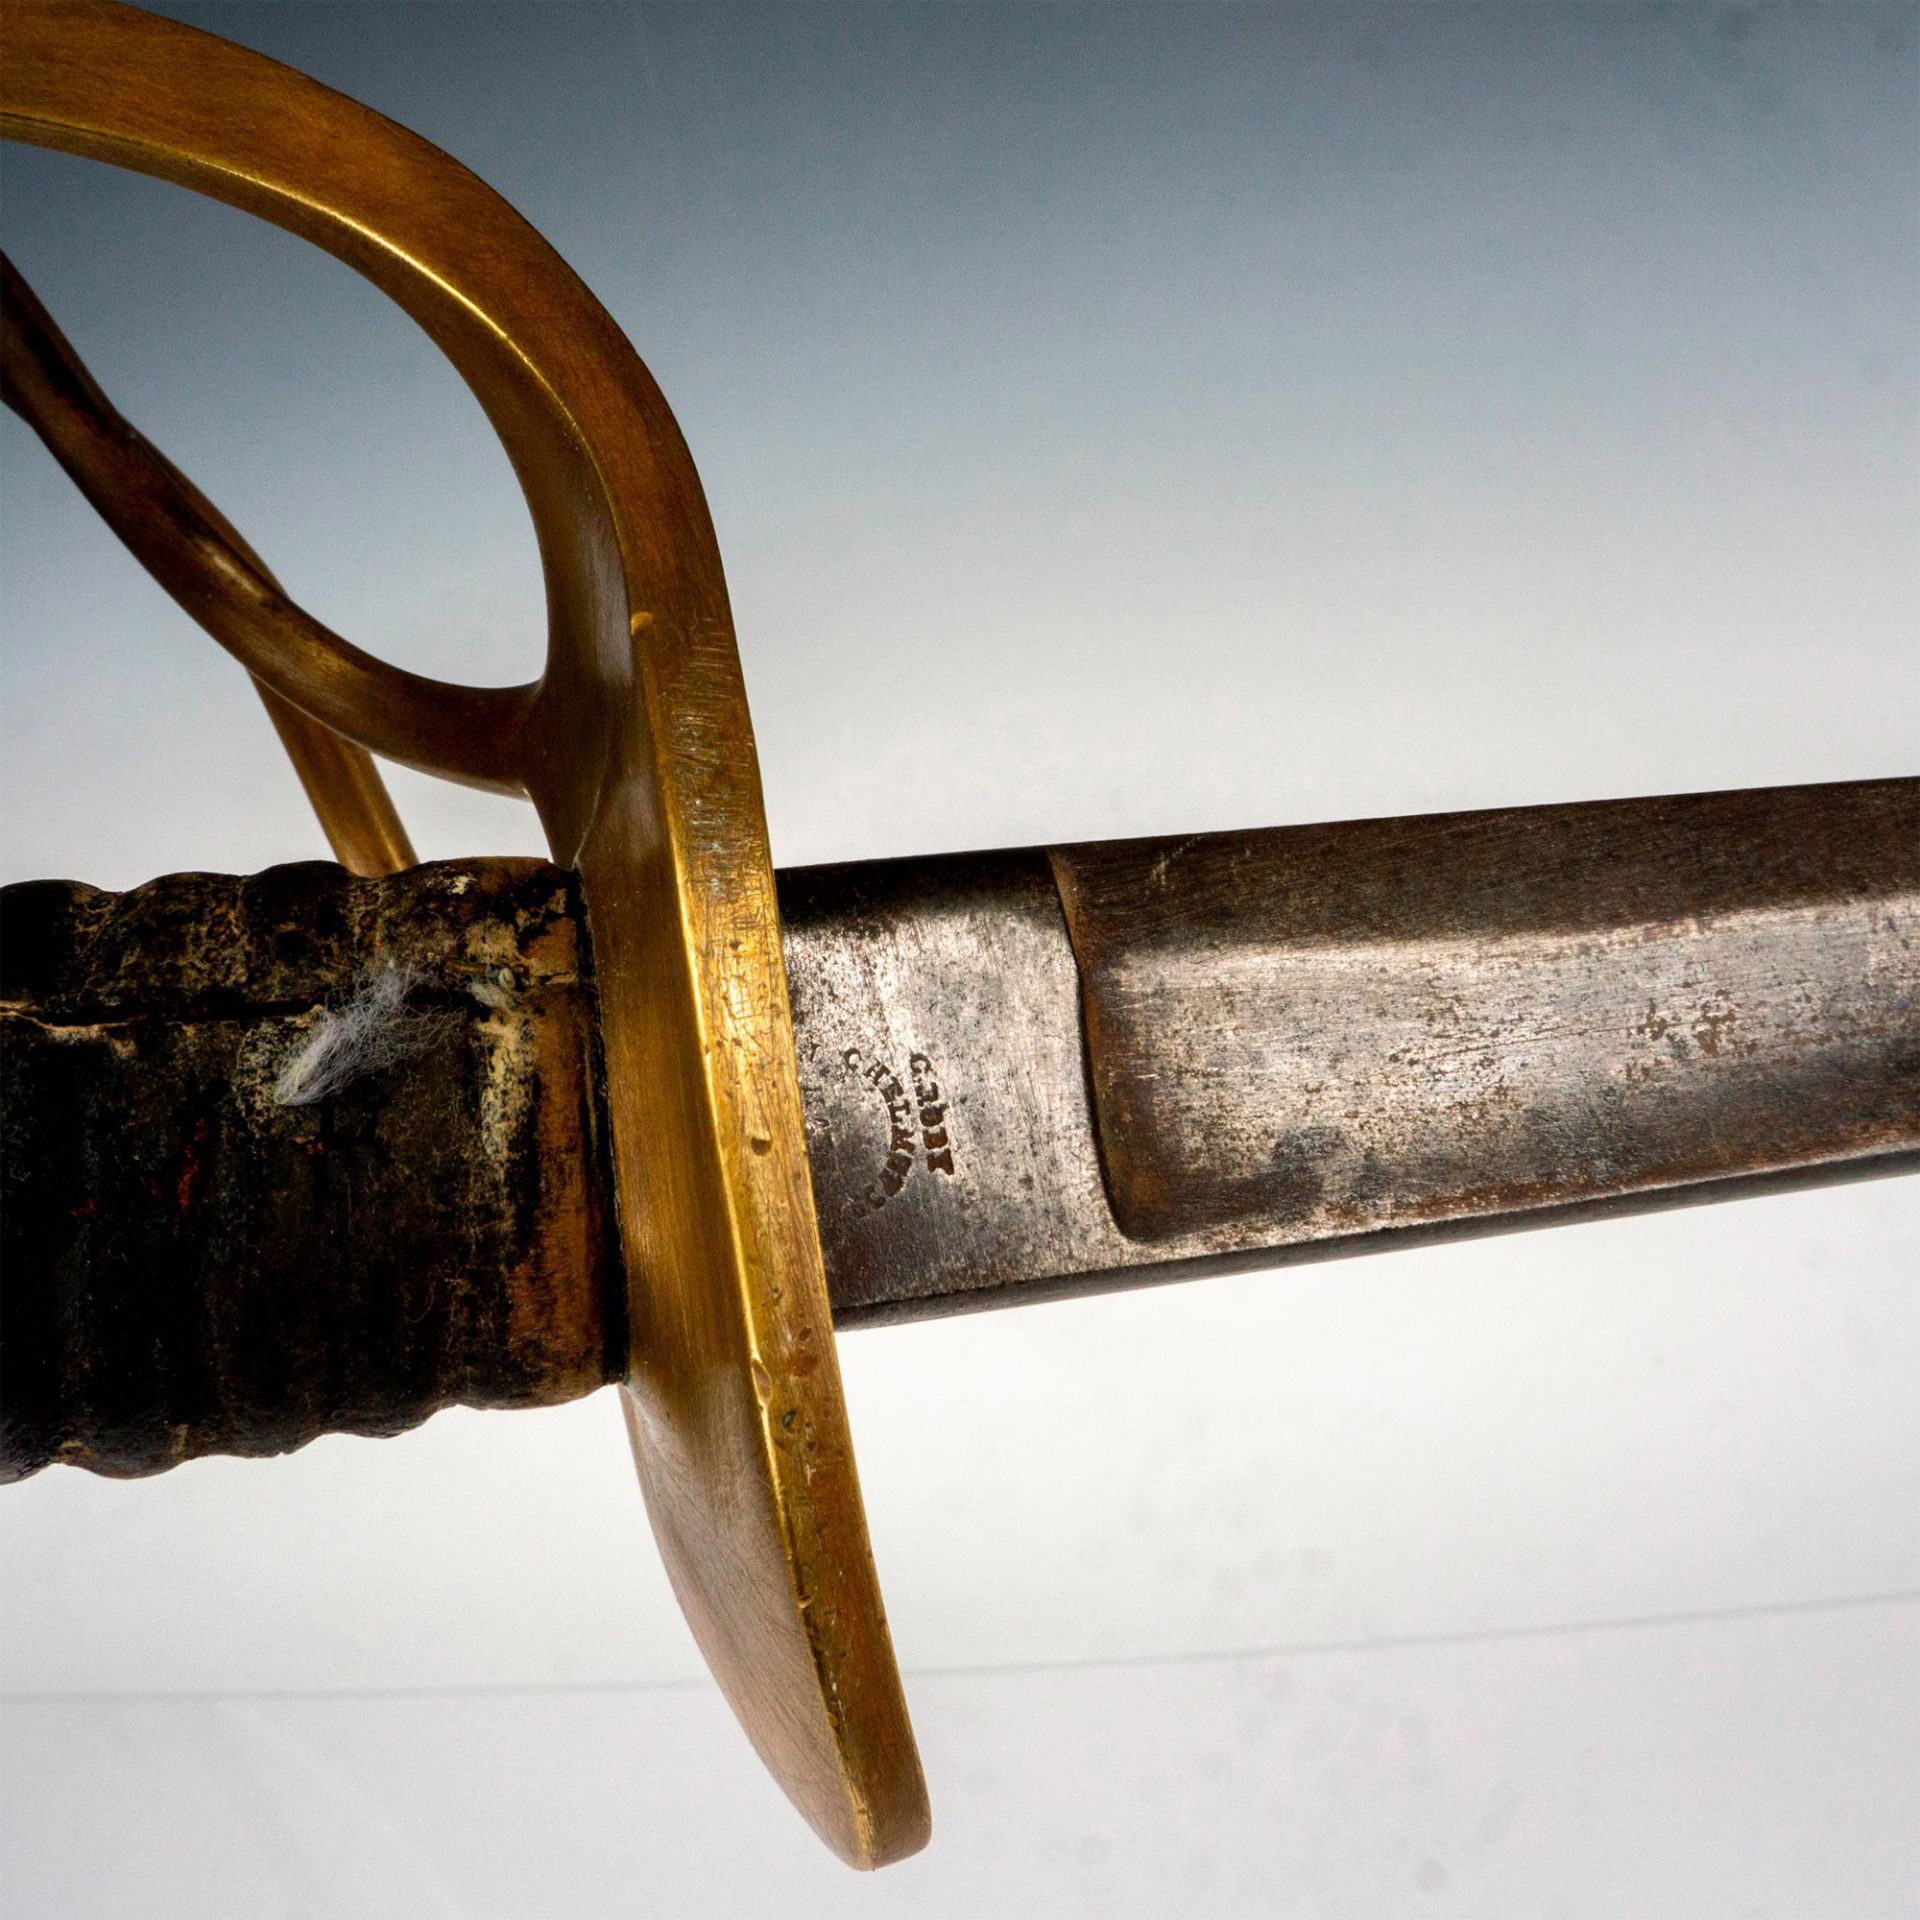 Christopher Roby Chelmsford U.S. 1865 Cavalry Civil War Sword - Image 3 of 4